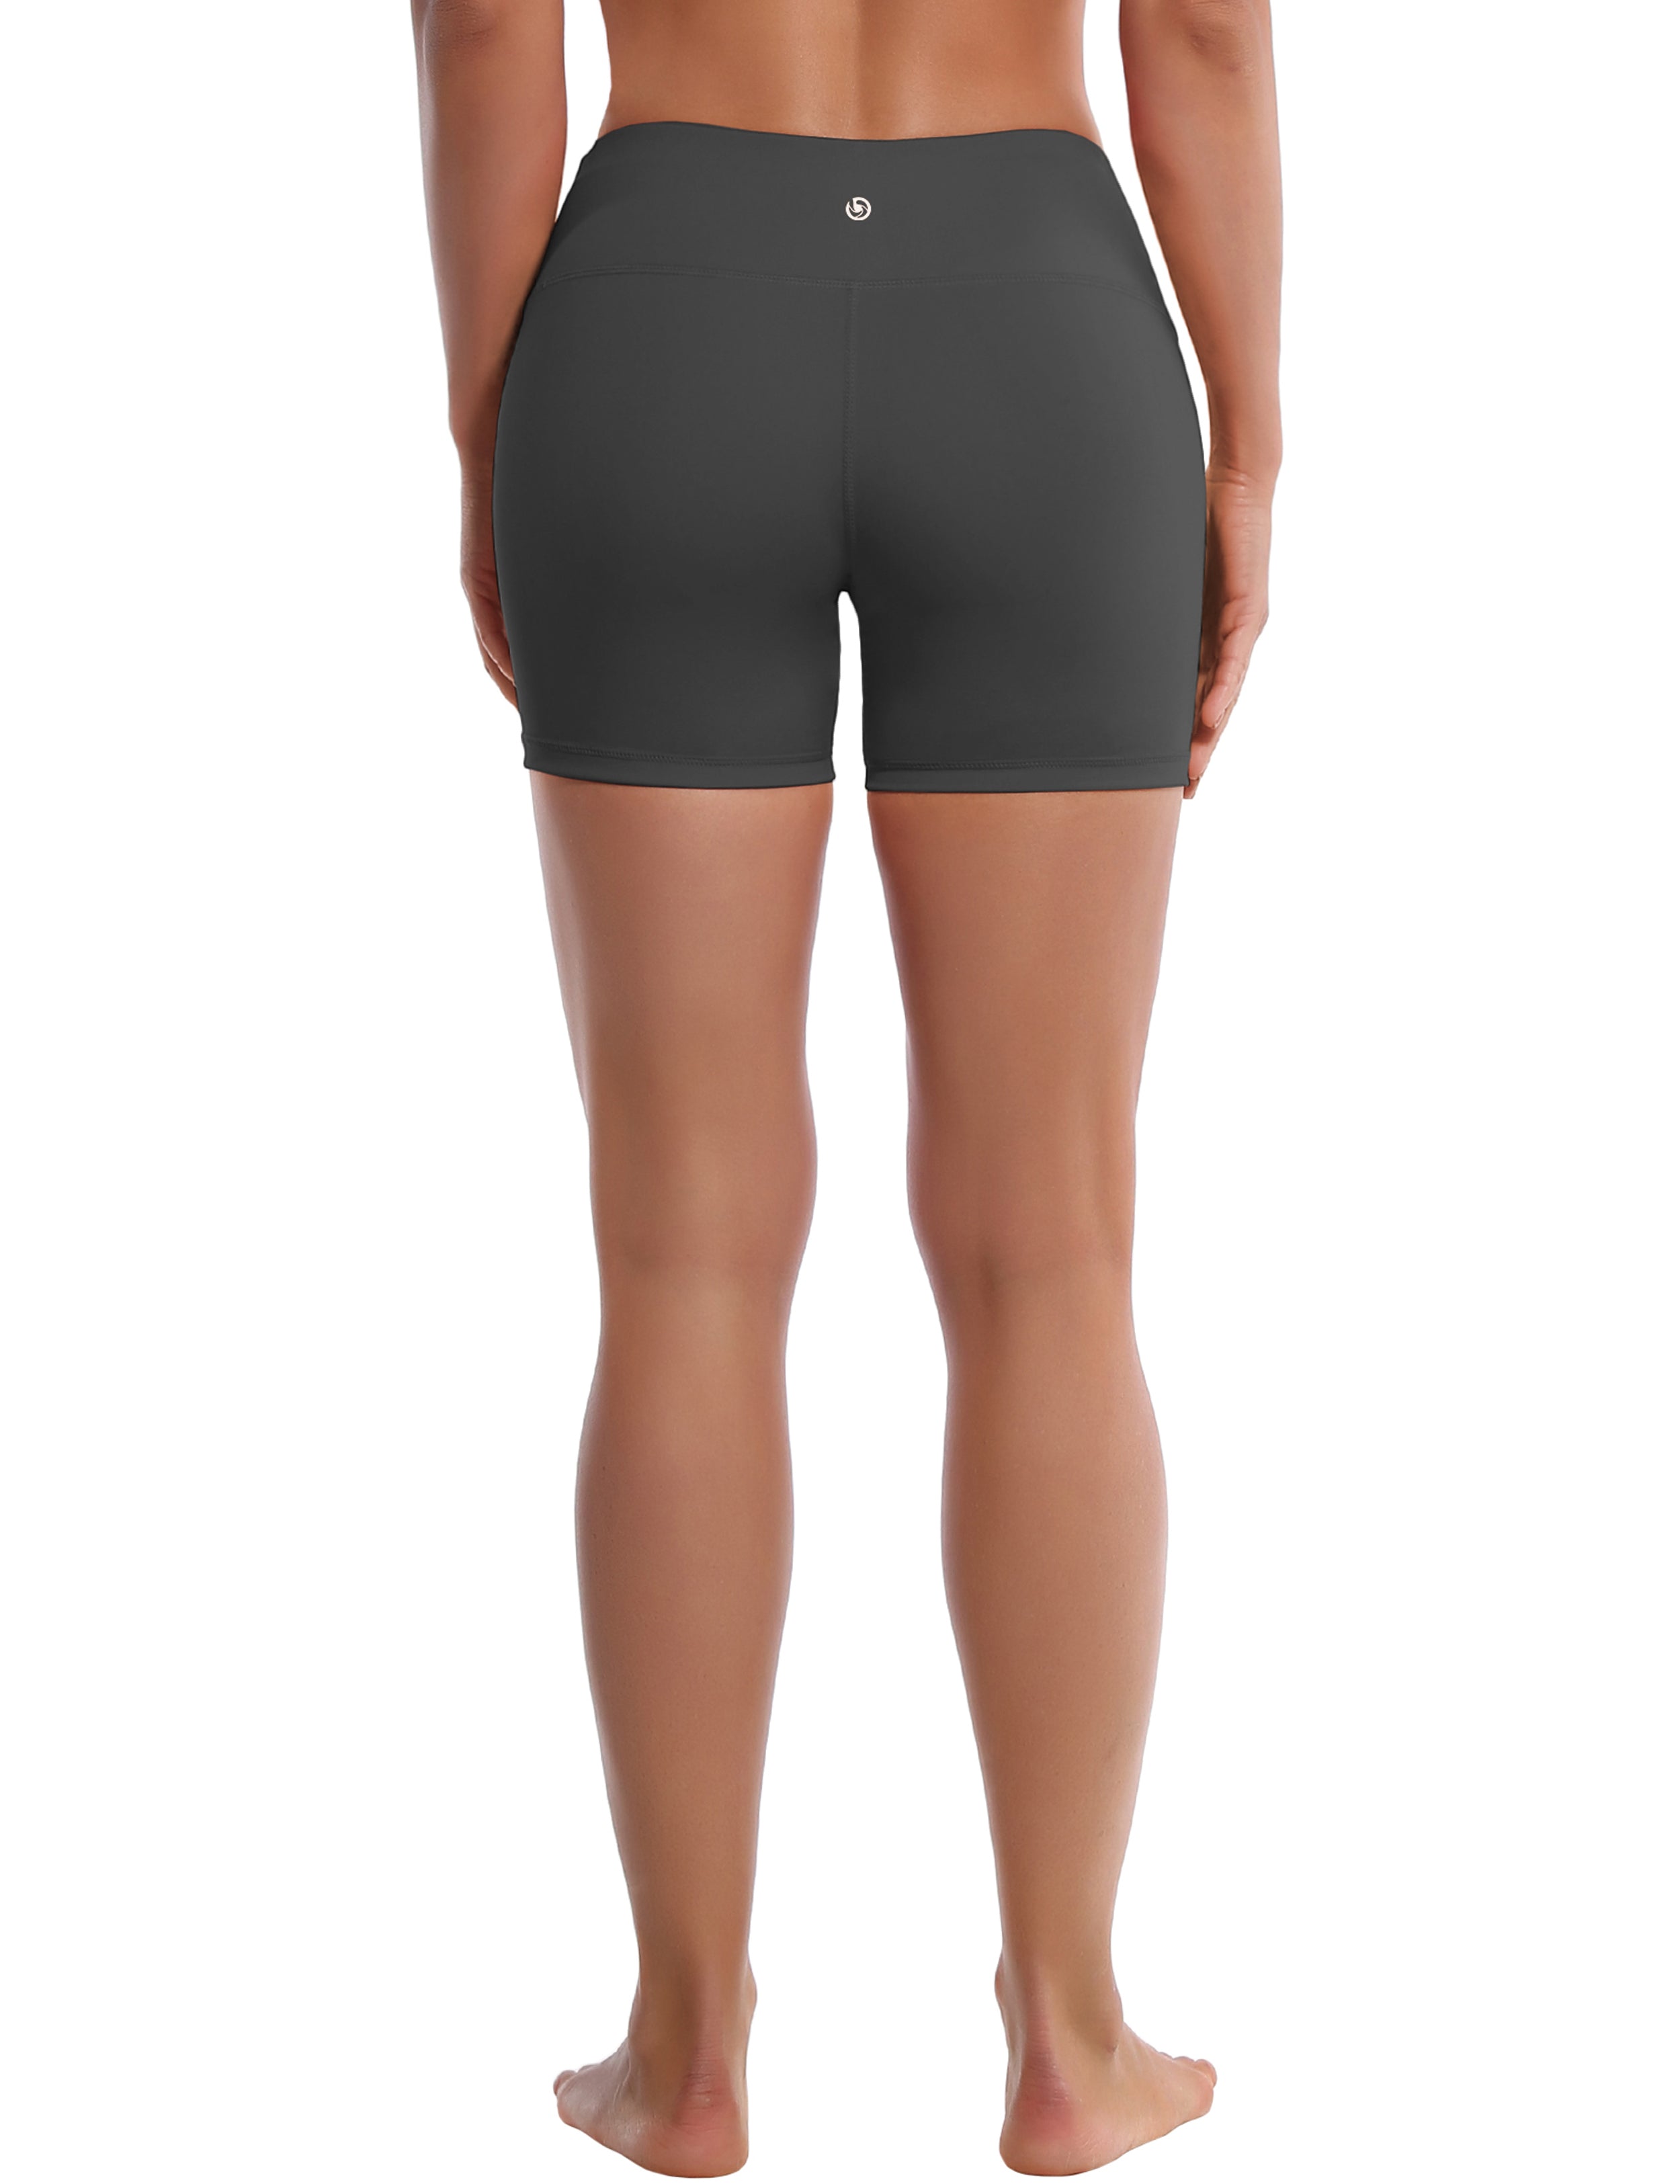 4" Yoga Shorts shadowcharcoal Sleek, soft, smooth and totally comfortable: our newest style is here. Softest-ever fabric High elasticity High density 4-way stretch Fabric doesn't attract lint easily No see-through Moisture-wicking Machine wash 75% Nylon, 25% Spandex